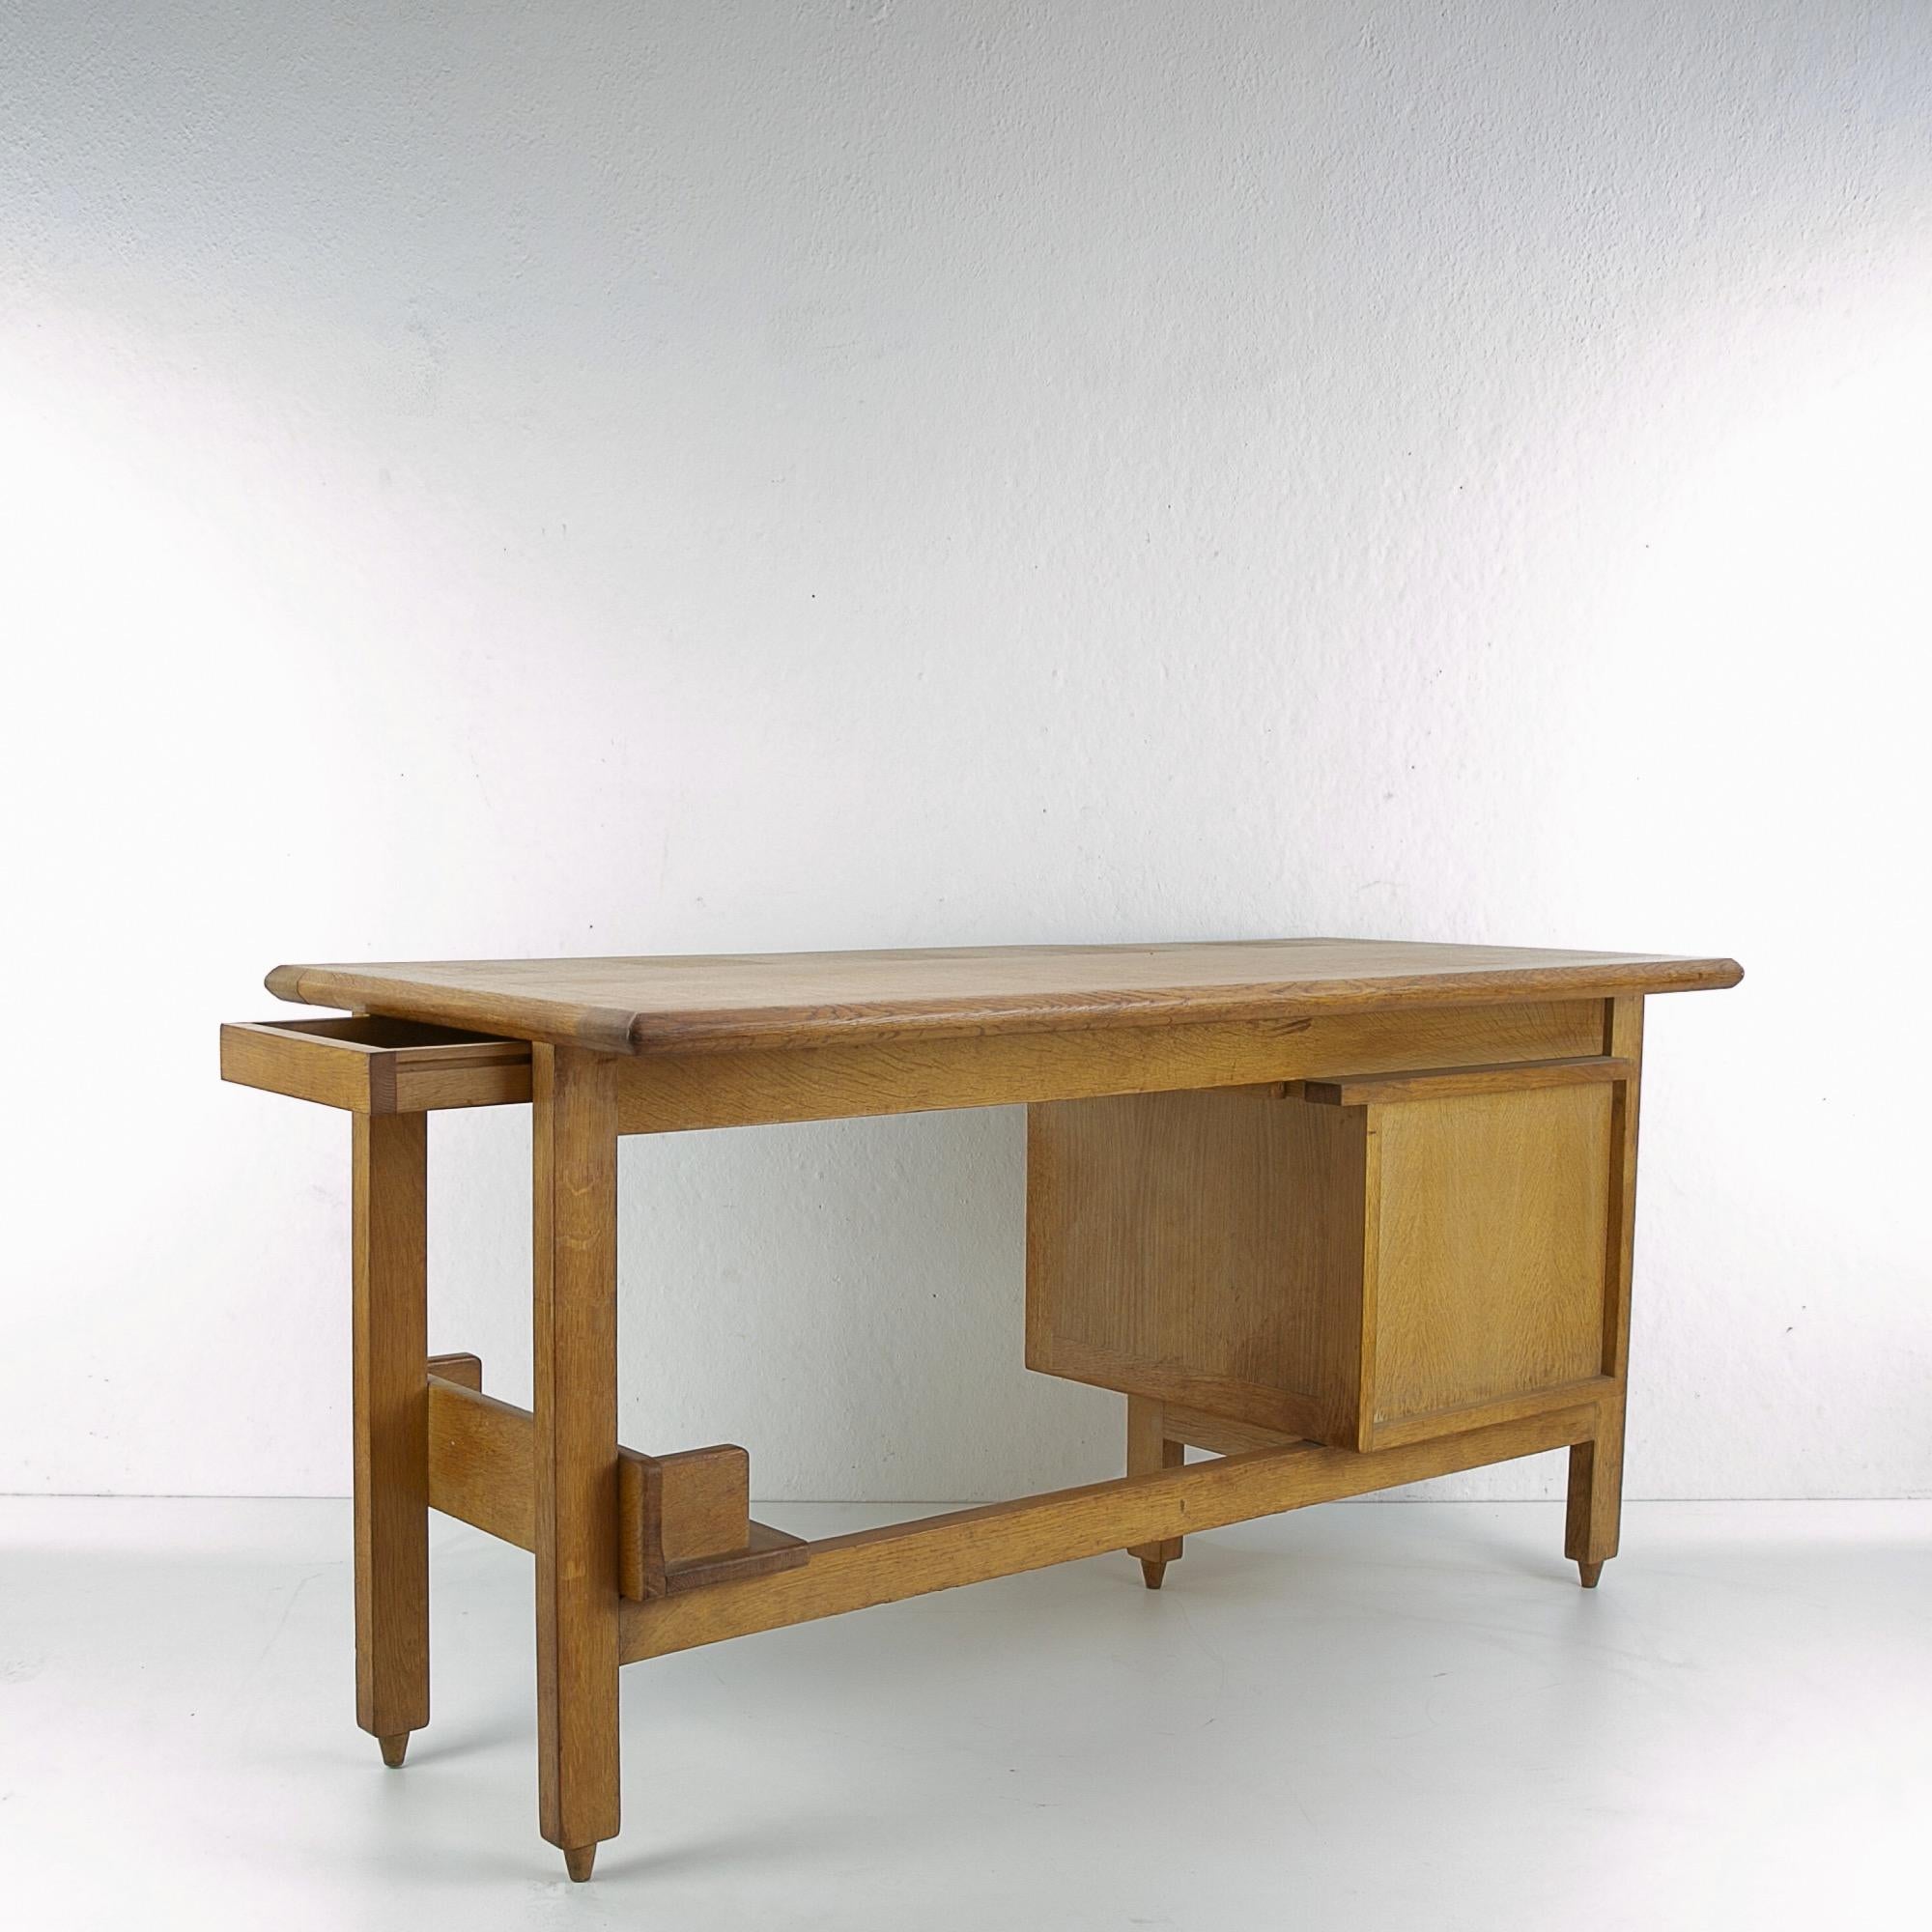 Guillerme and Chambron 3-Drawers Oak Desk with Ceramic Handles (Französisch)